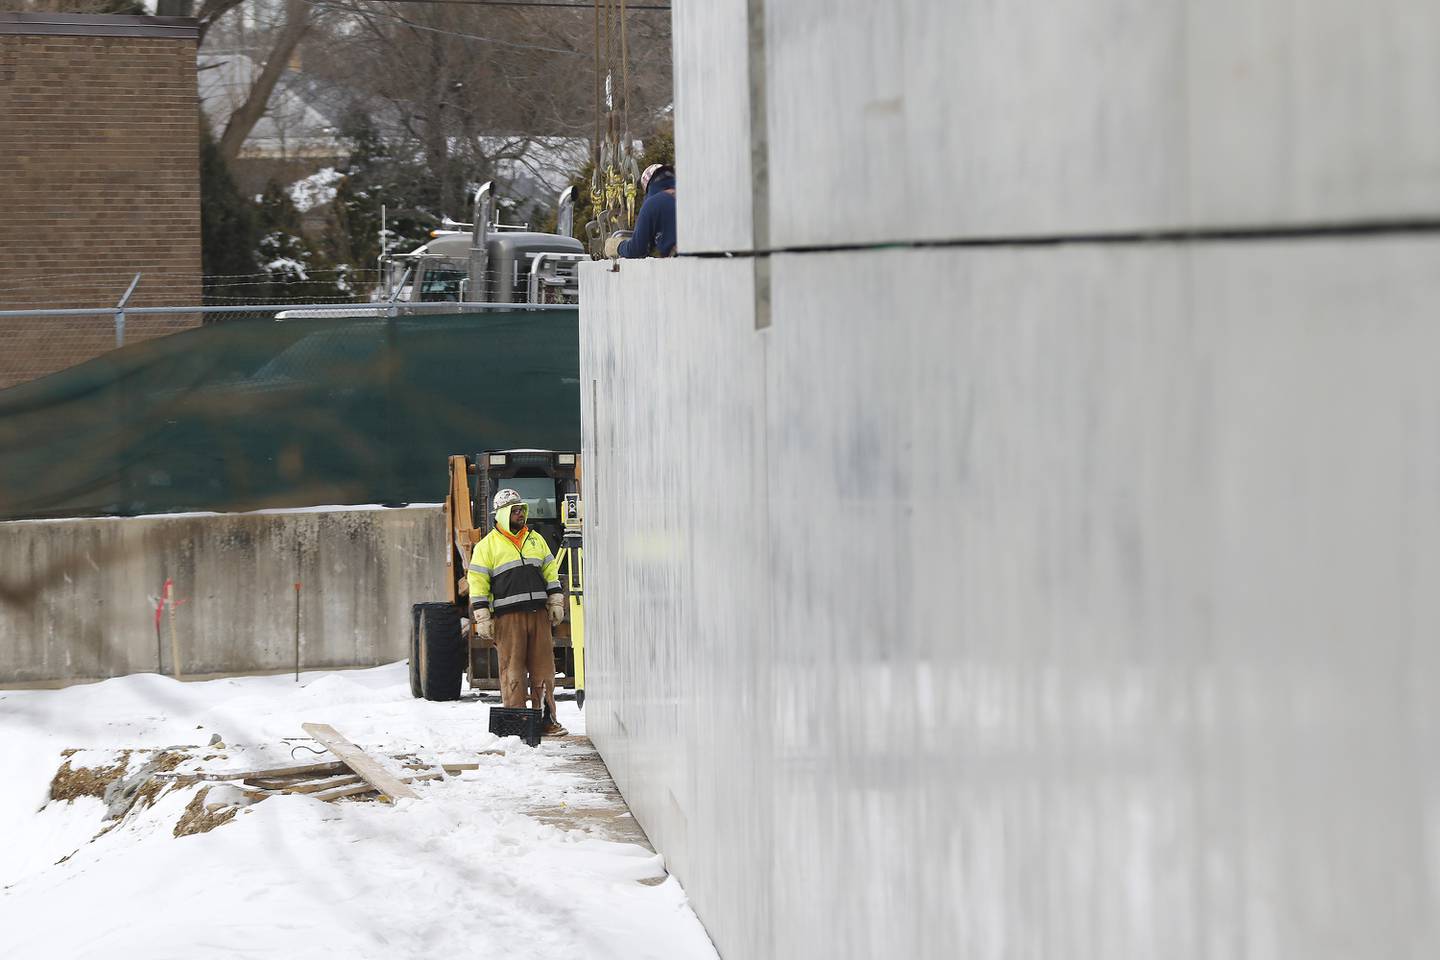 Construction workers are seen Tuesday, Jan. 4, 2022, placing walls on a new apartment building's parking structure at the intersection of Algonquin Road and Northwest Highway in Fox River Grove.